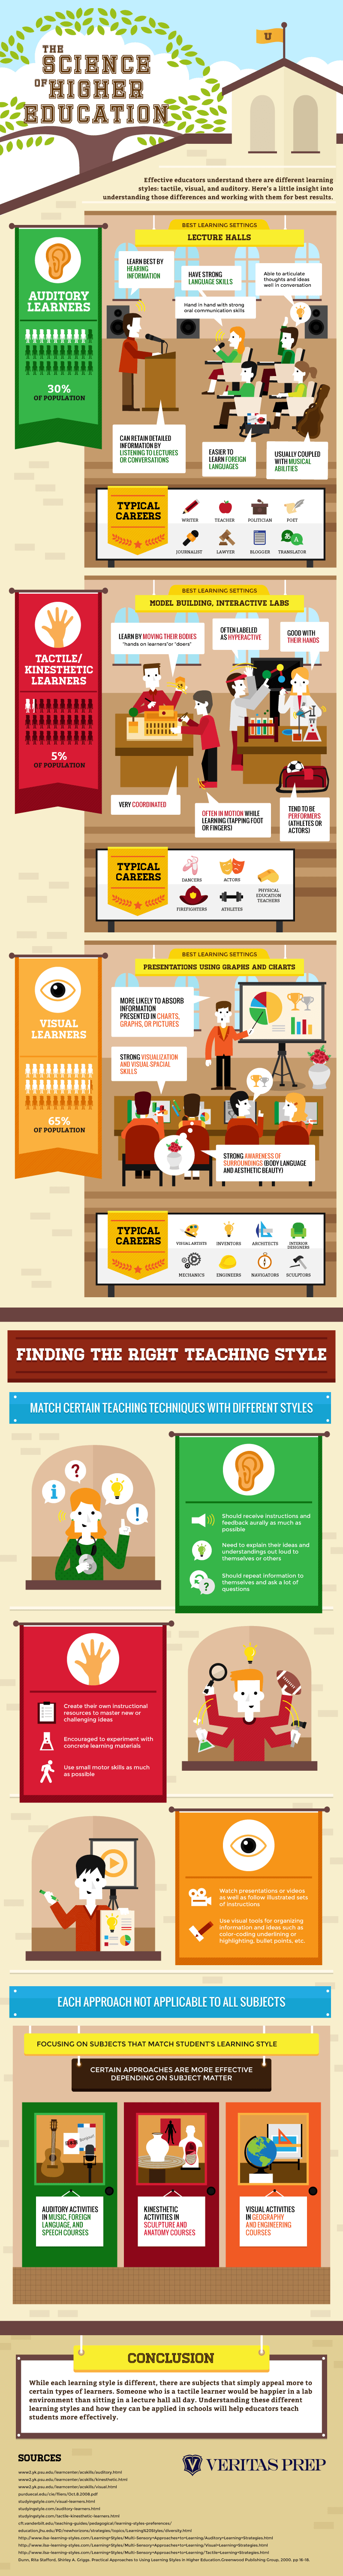 The Science of Higher Education Infographic